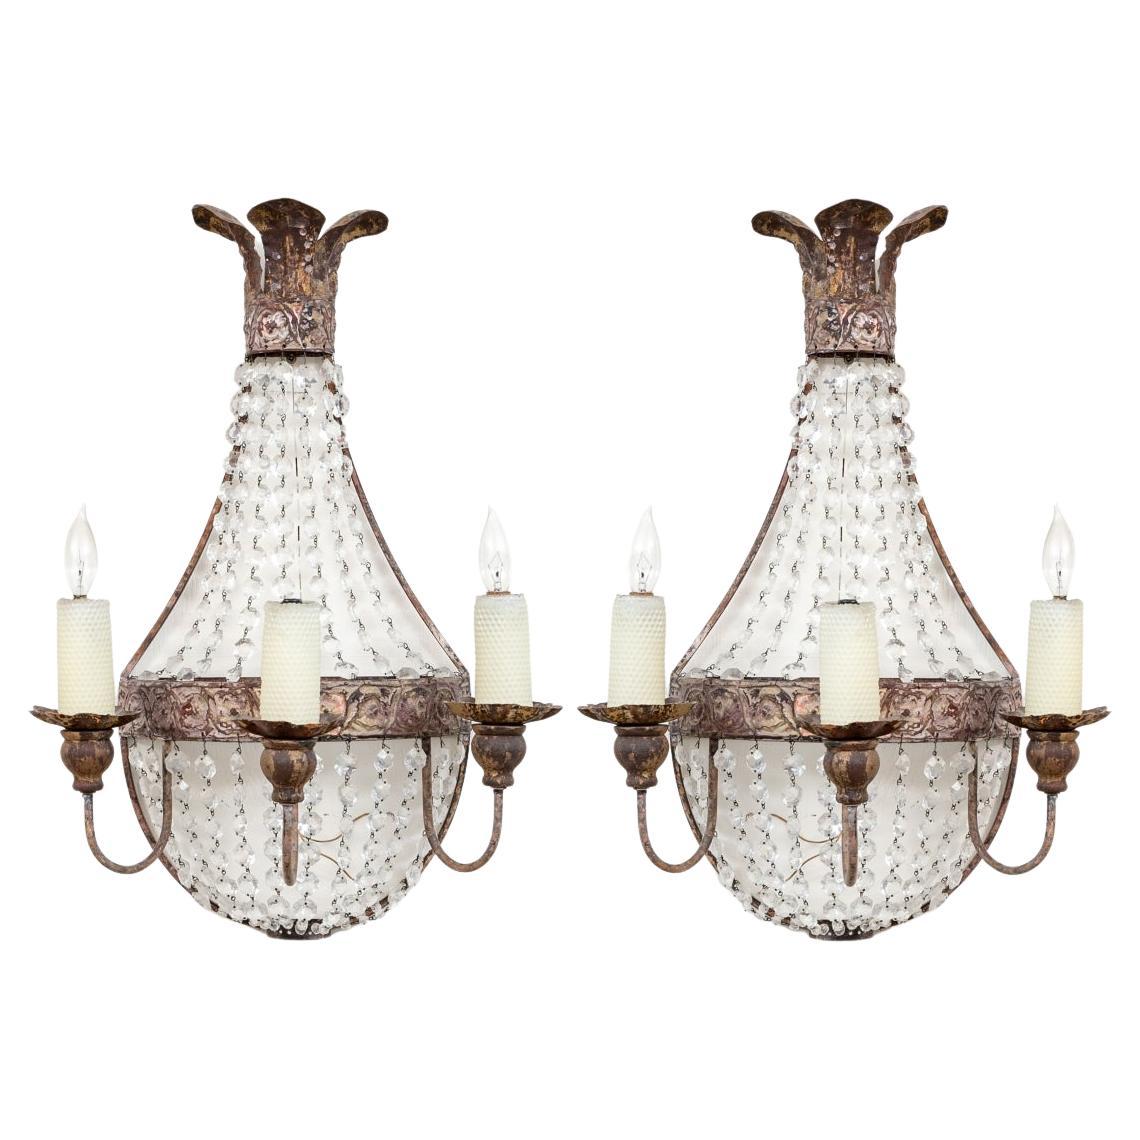 Pair Of Empire Style Niermann Weeks Crystal Wall Sconces For Sale